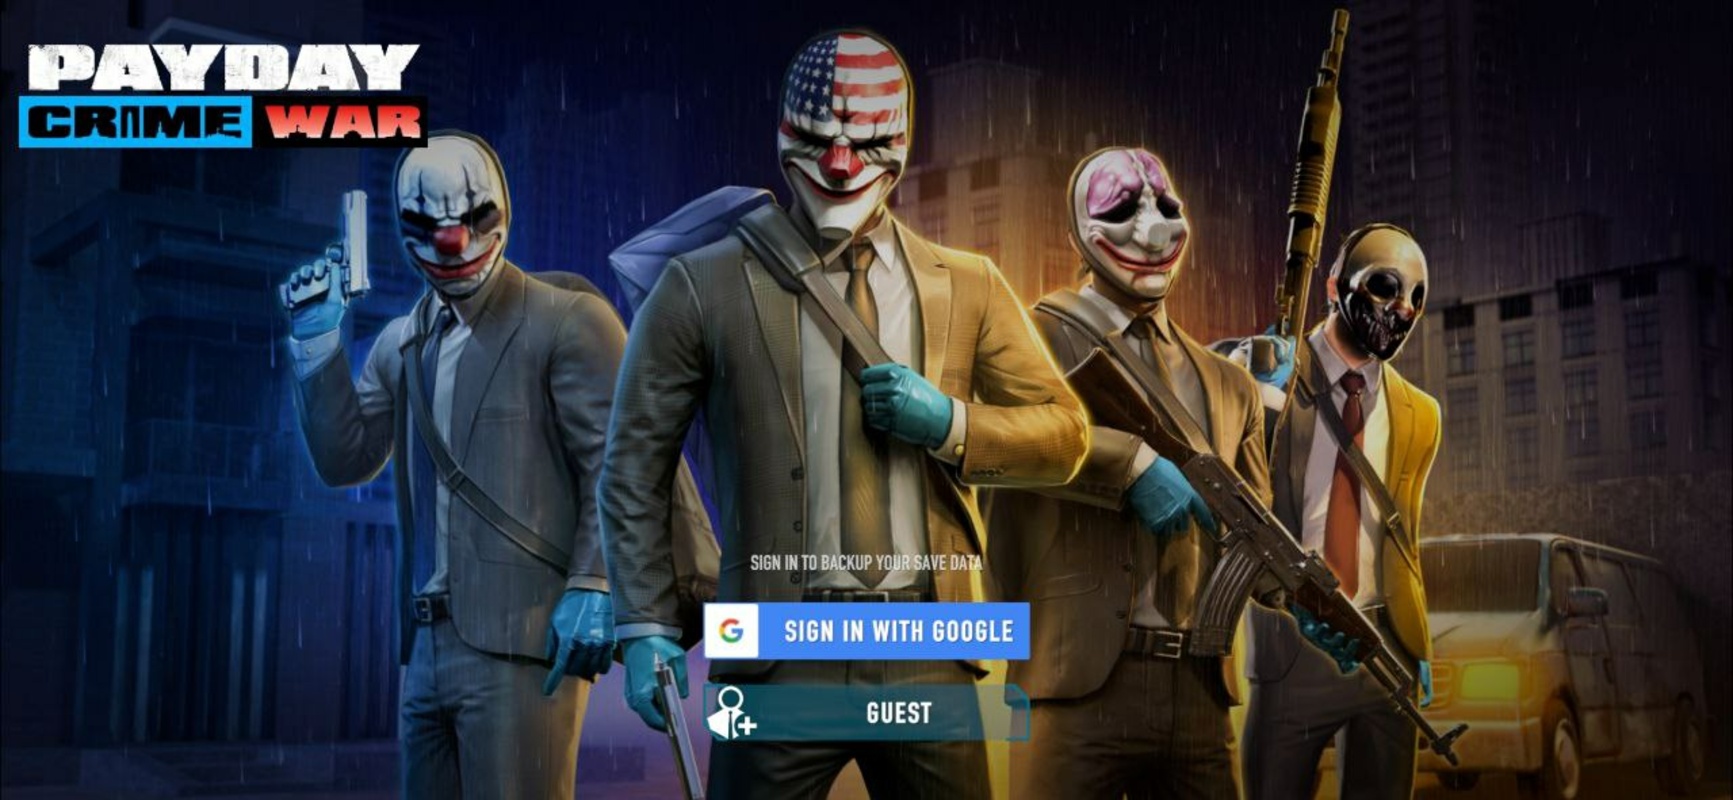 PAYDAY: Crime War 2022.0.11 APK for Android Screenshot 1